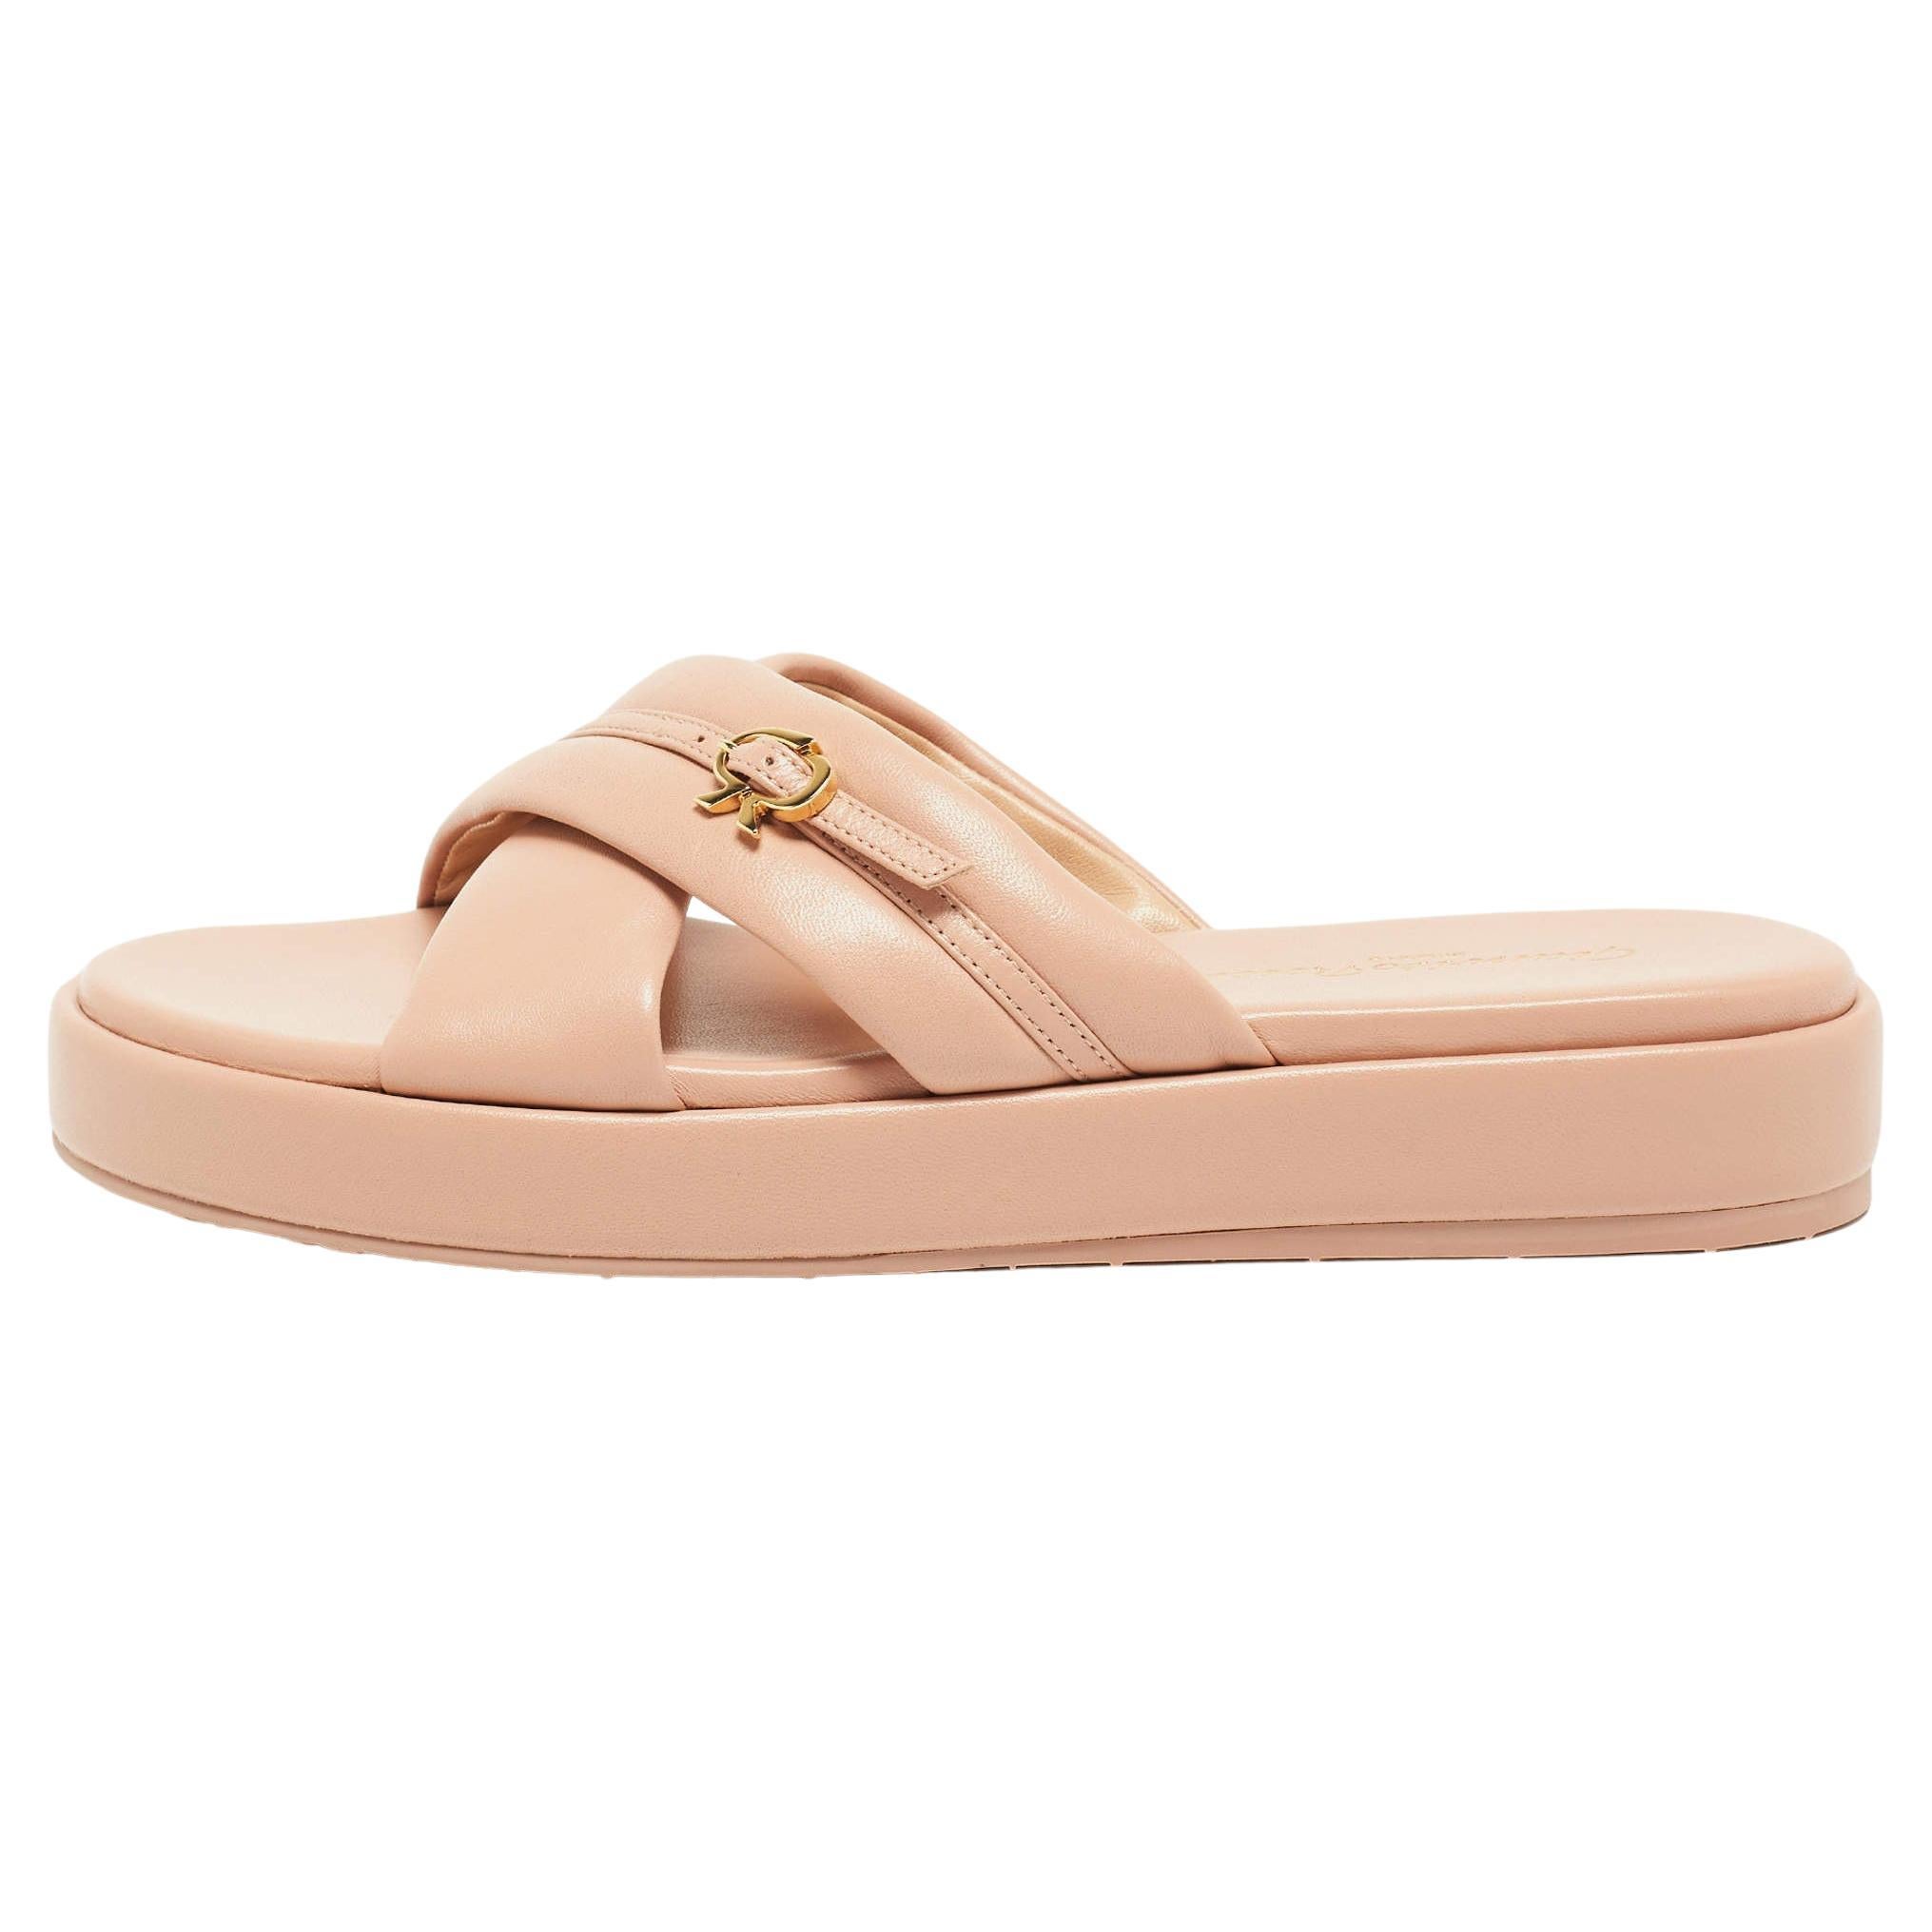 Gianvito Rossi Beige Leather Alima Flat Slides Size 37.5 For Sale